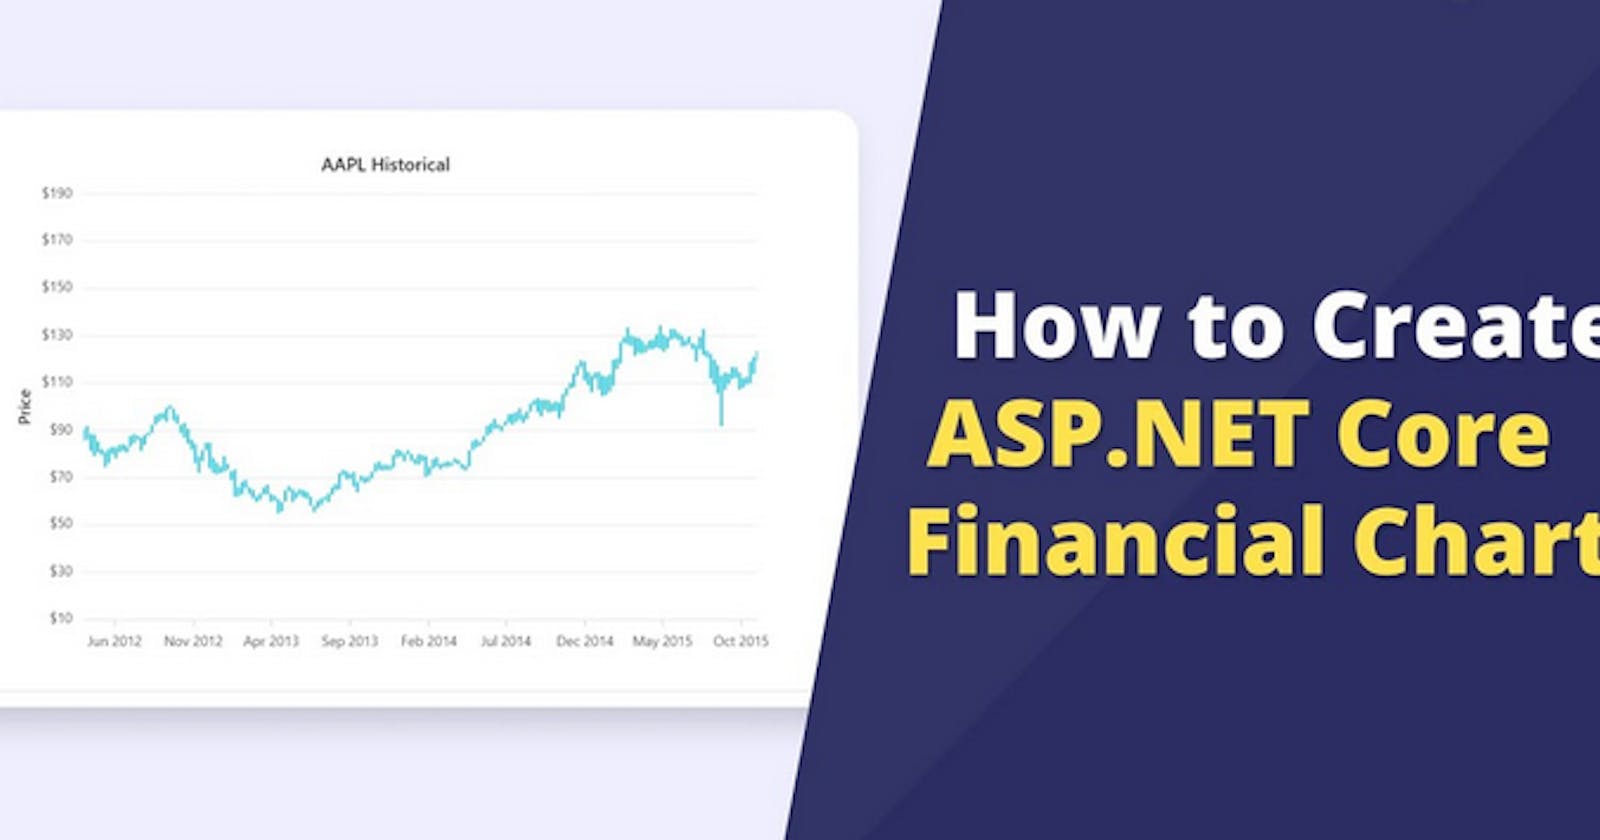 How to Create ASP.NET Core Financial Charts